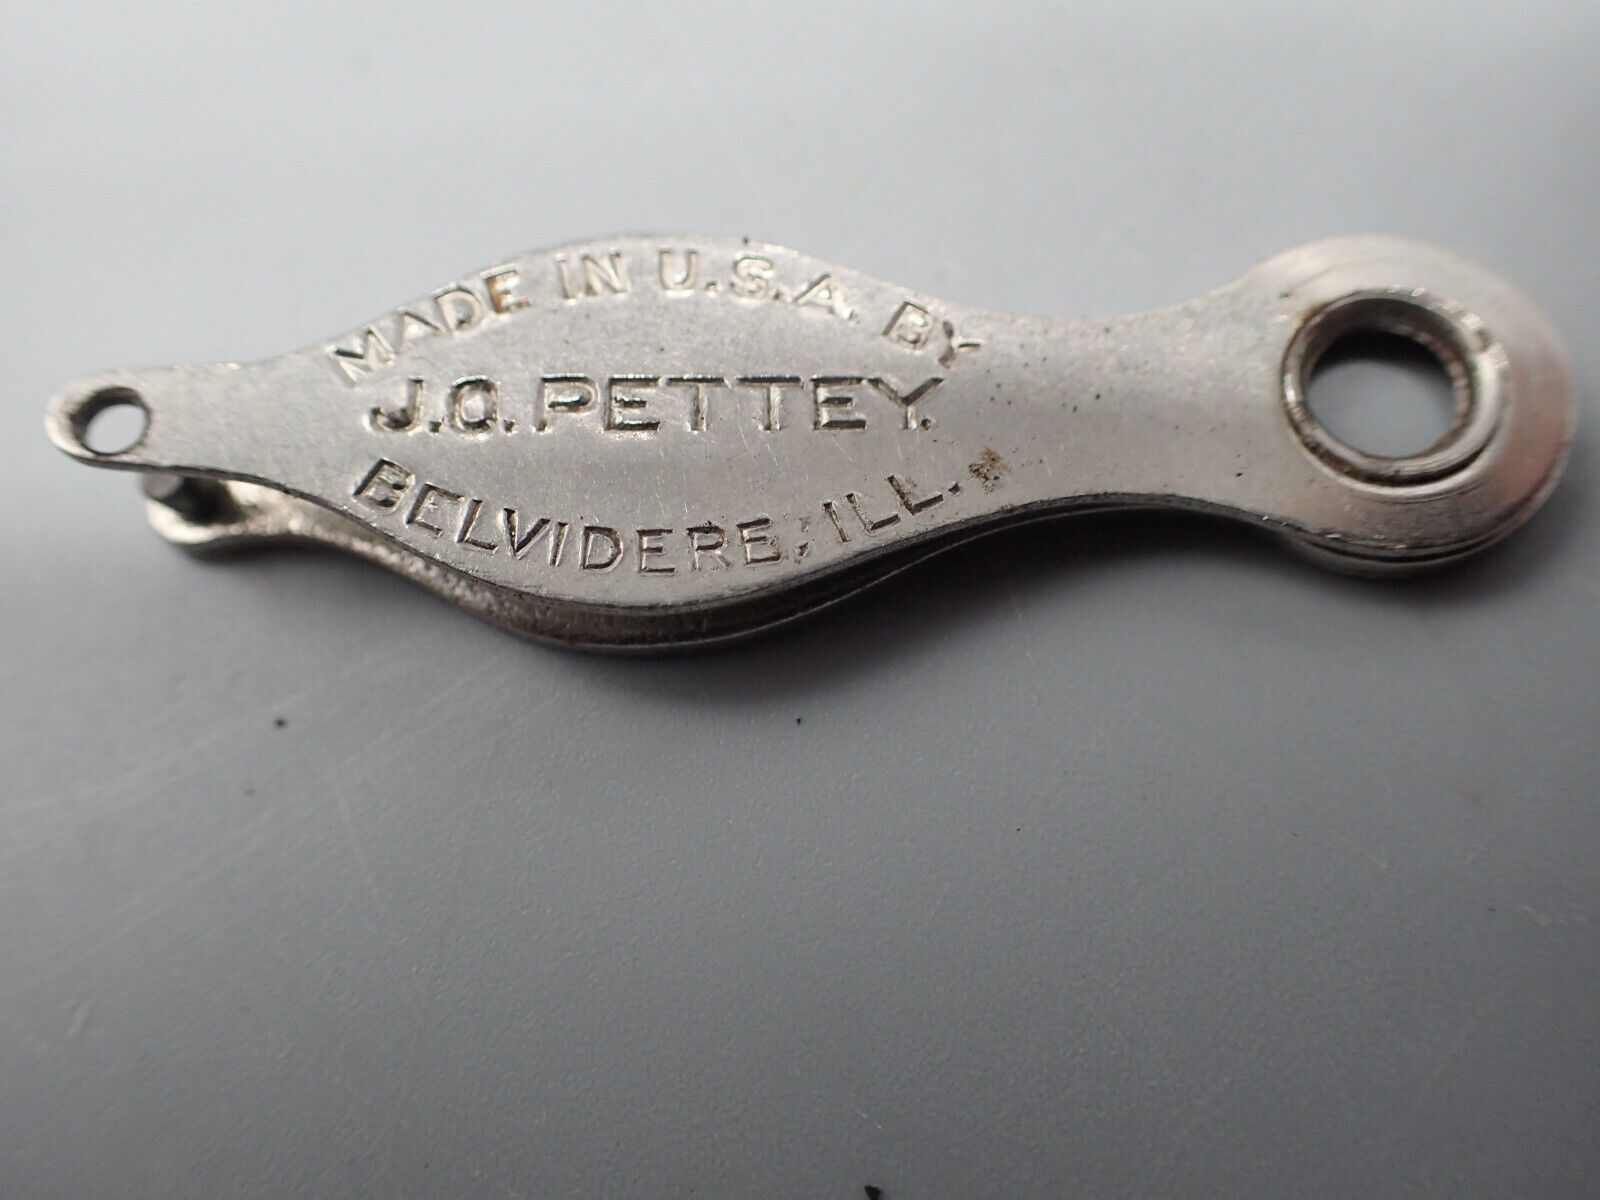 Vintage J.O. Pettey Belvidere Illinois Chicken Foot Punch Tagger Advertising 